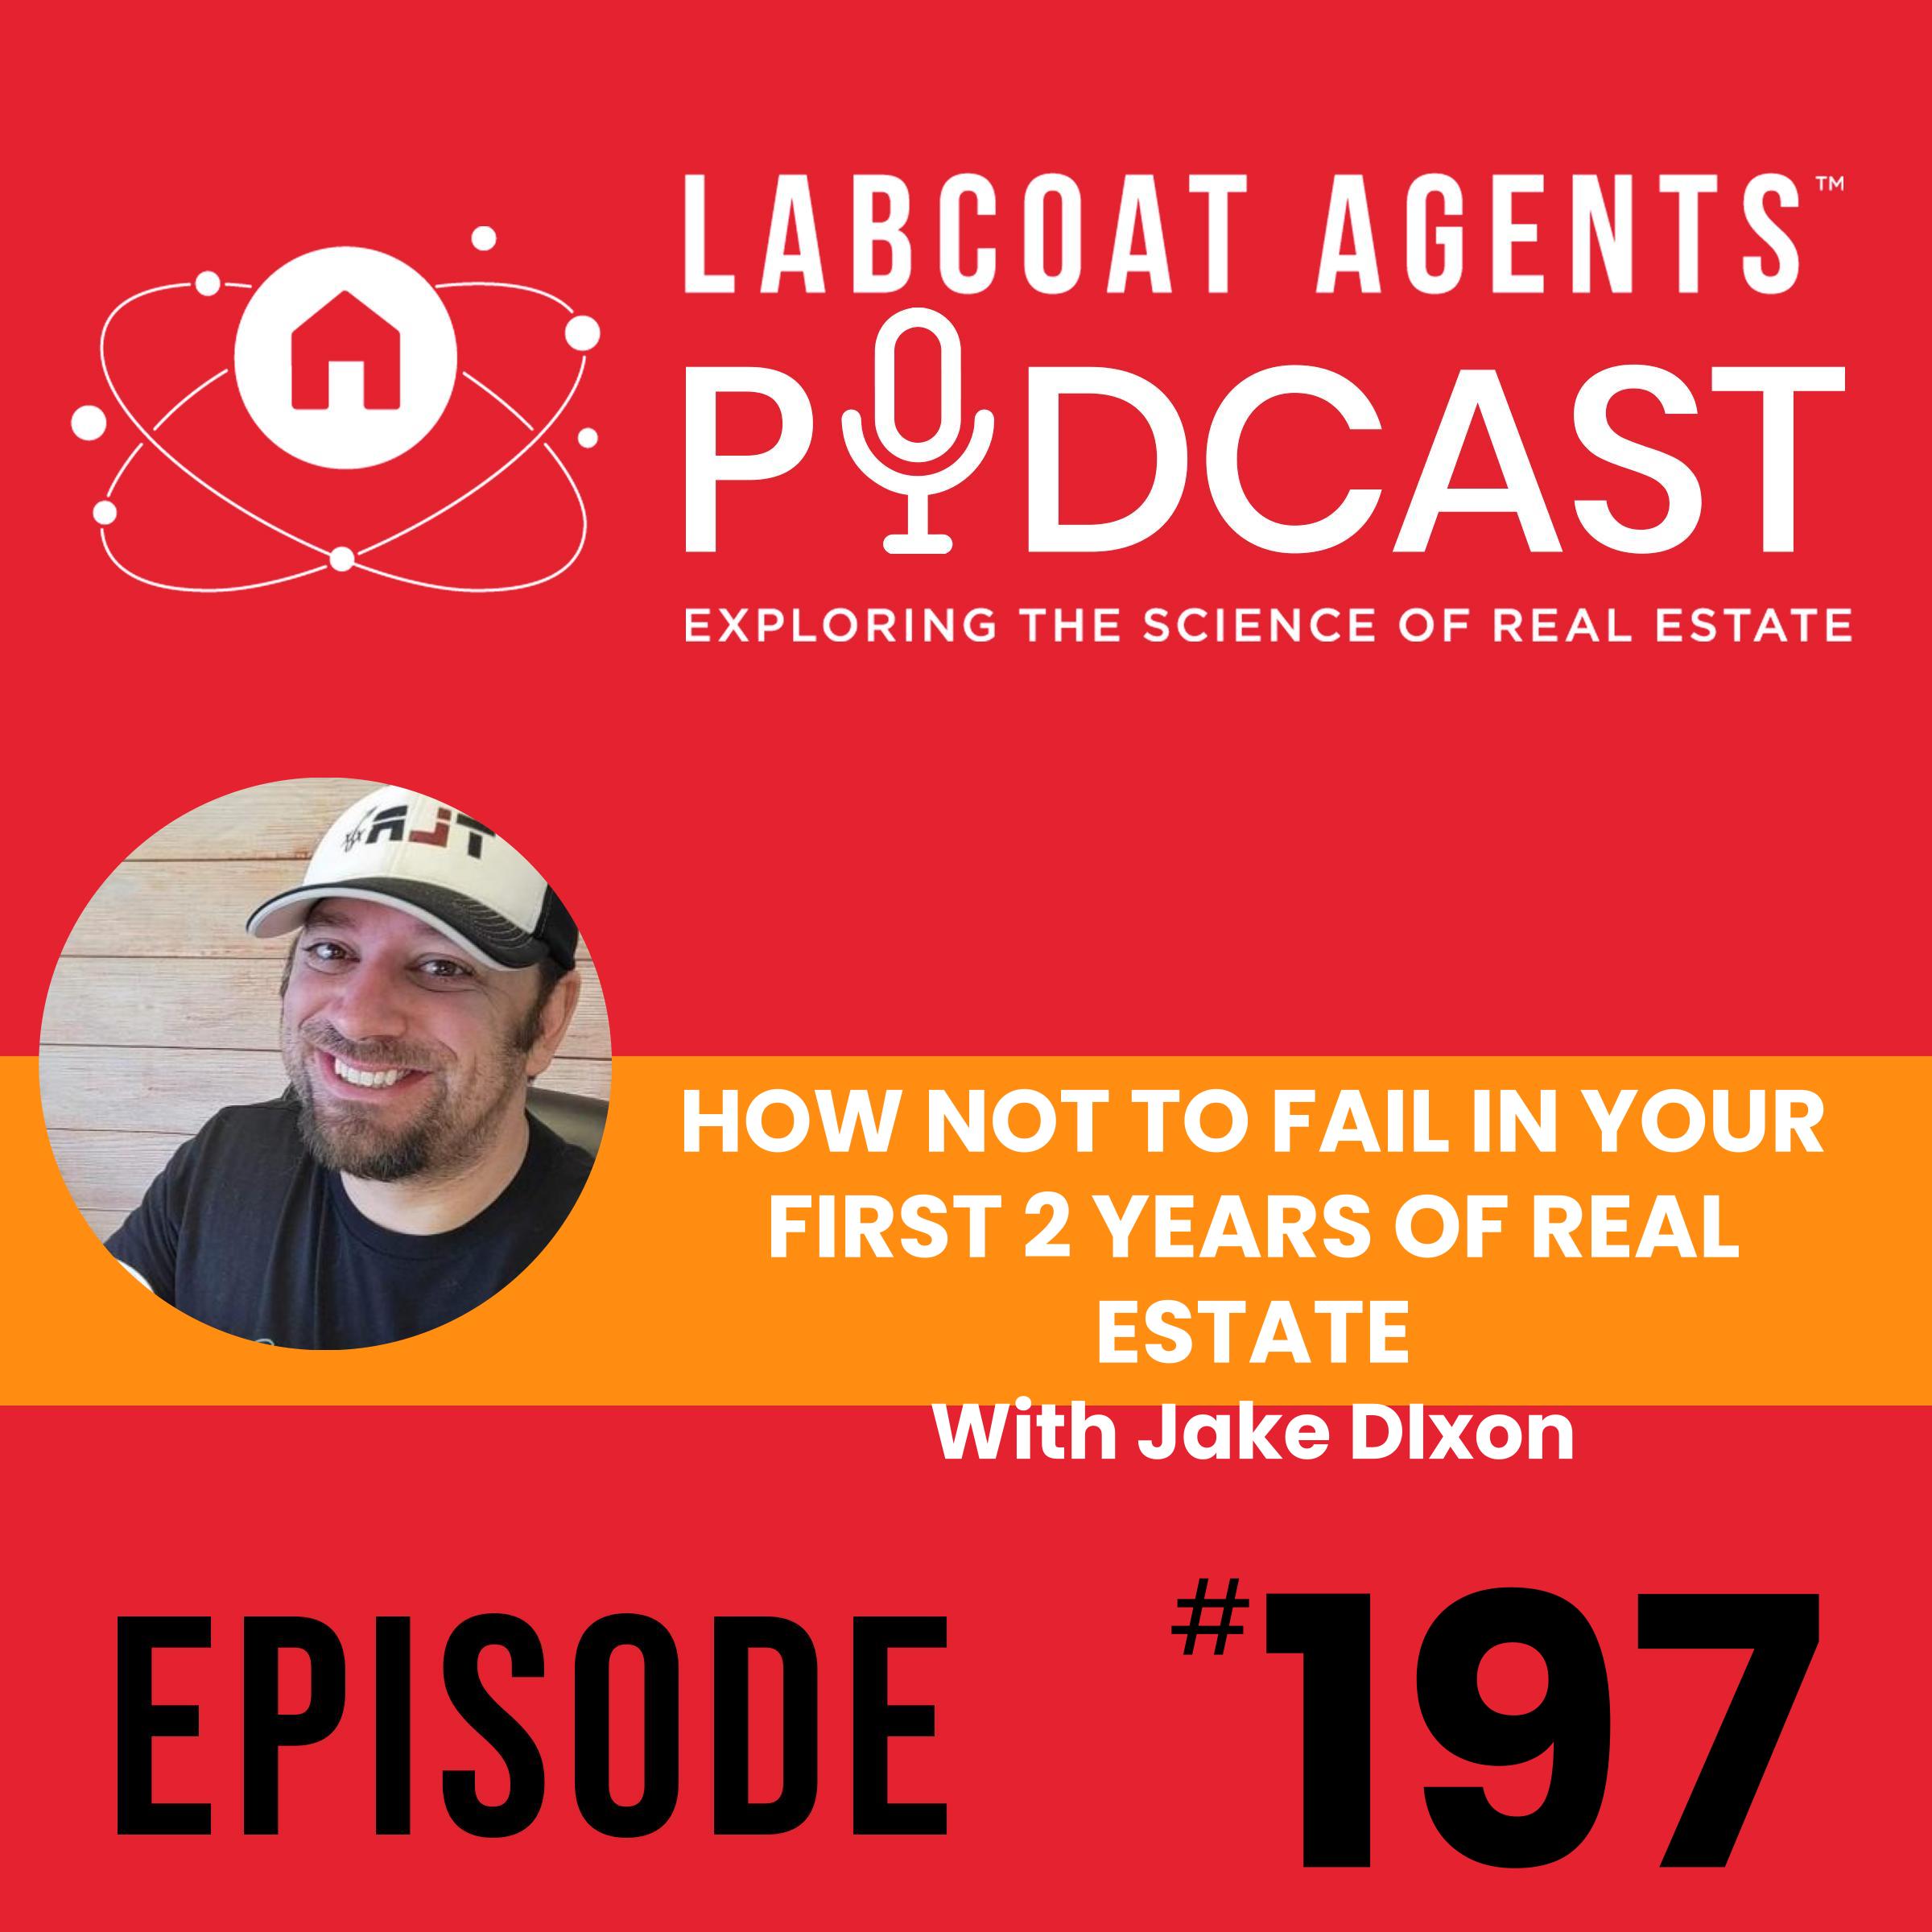 LabCoat Agents Podcast: HOW TO NOT FAIL IN YOUR FIRST 2 YEARS OF REAL ESTATE